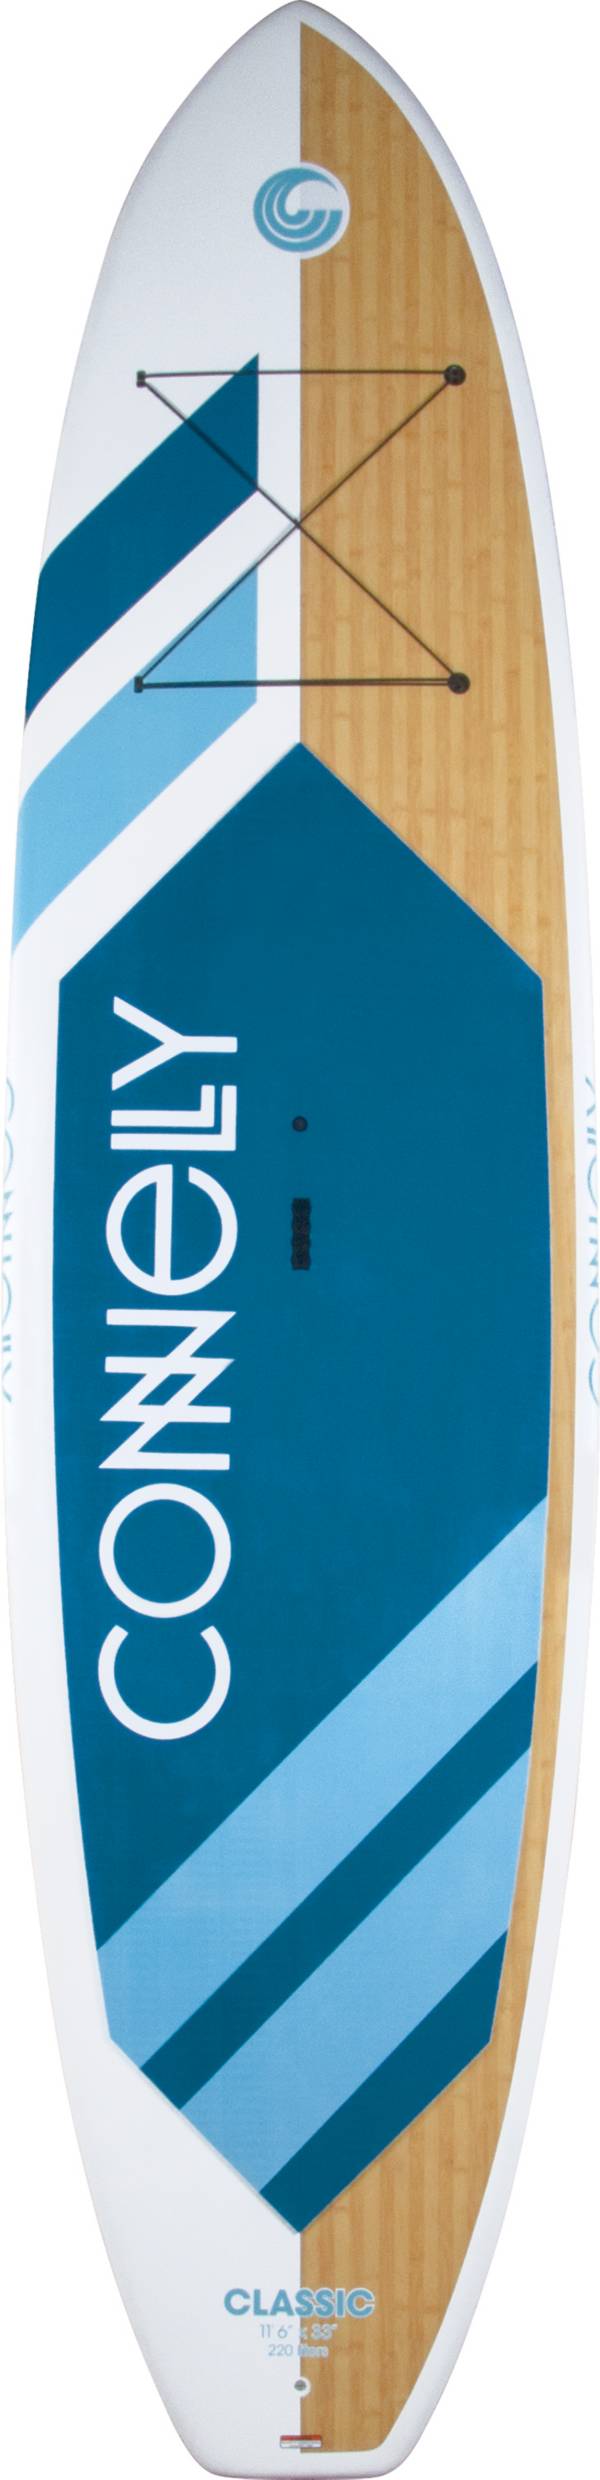 Connelly Classic 11'6" Stand-Up Paddle Board product image